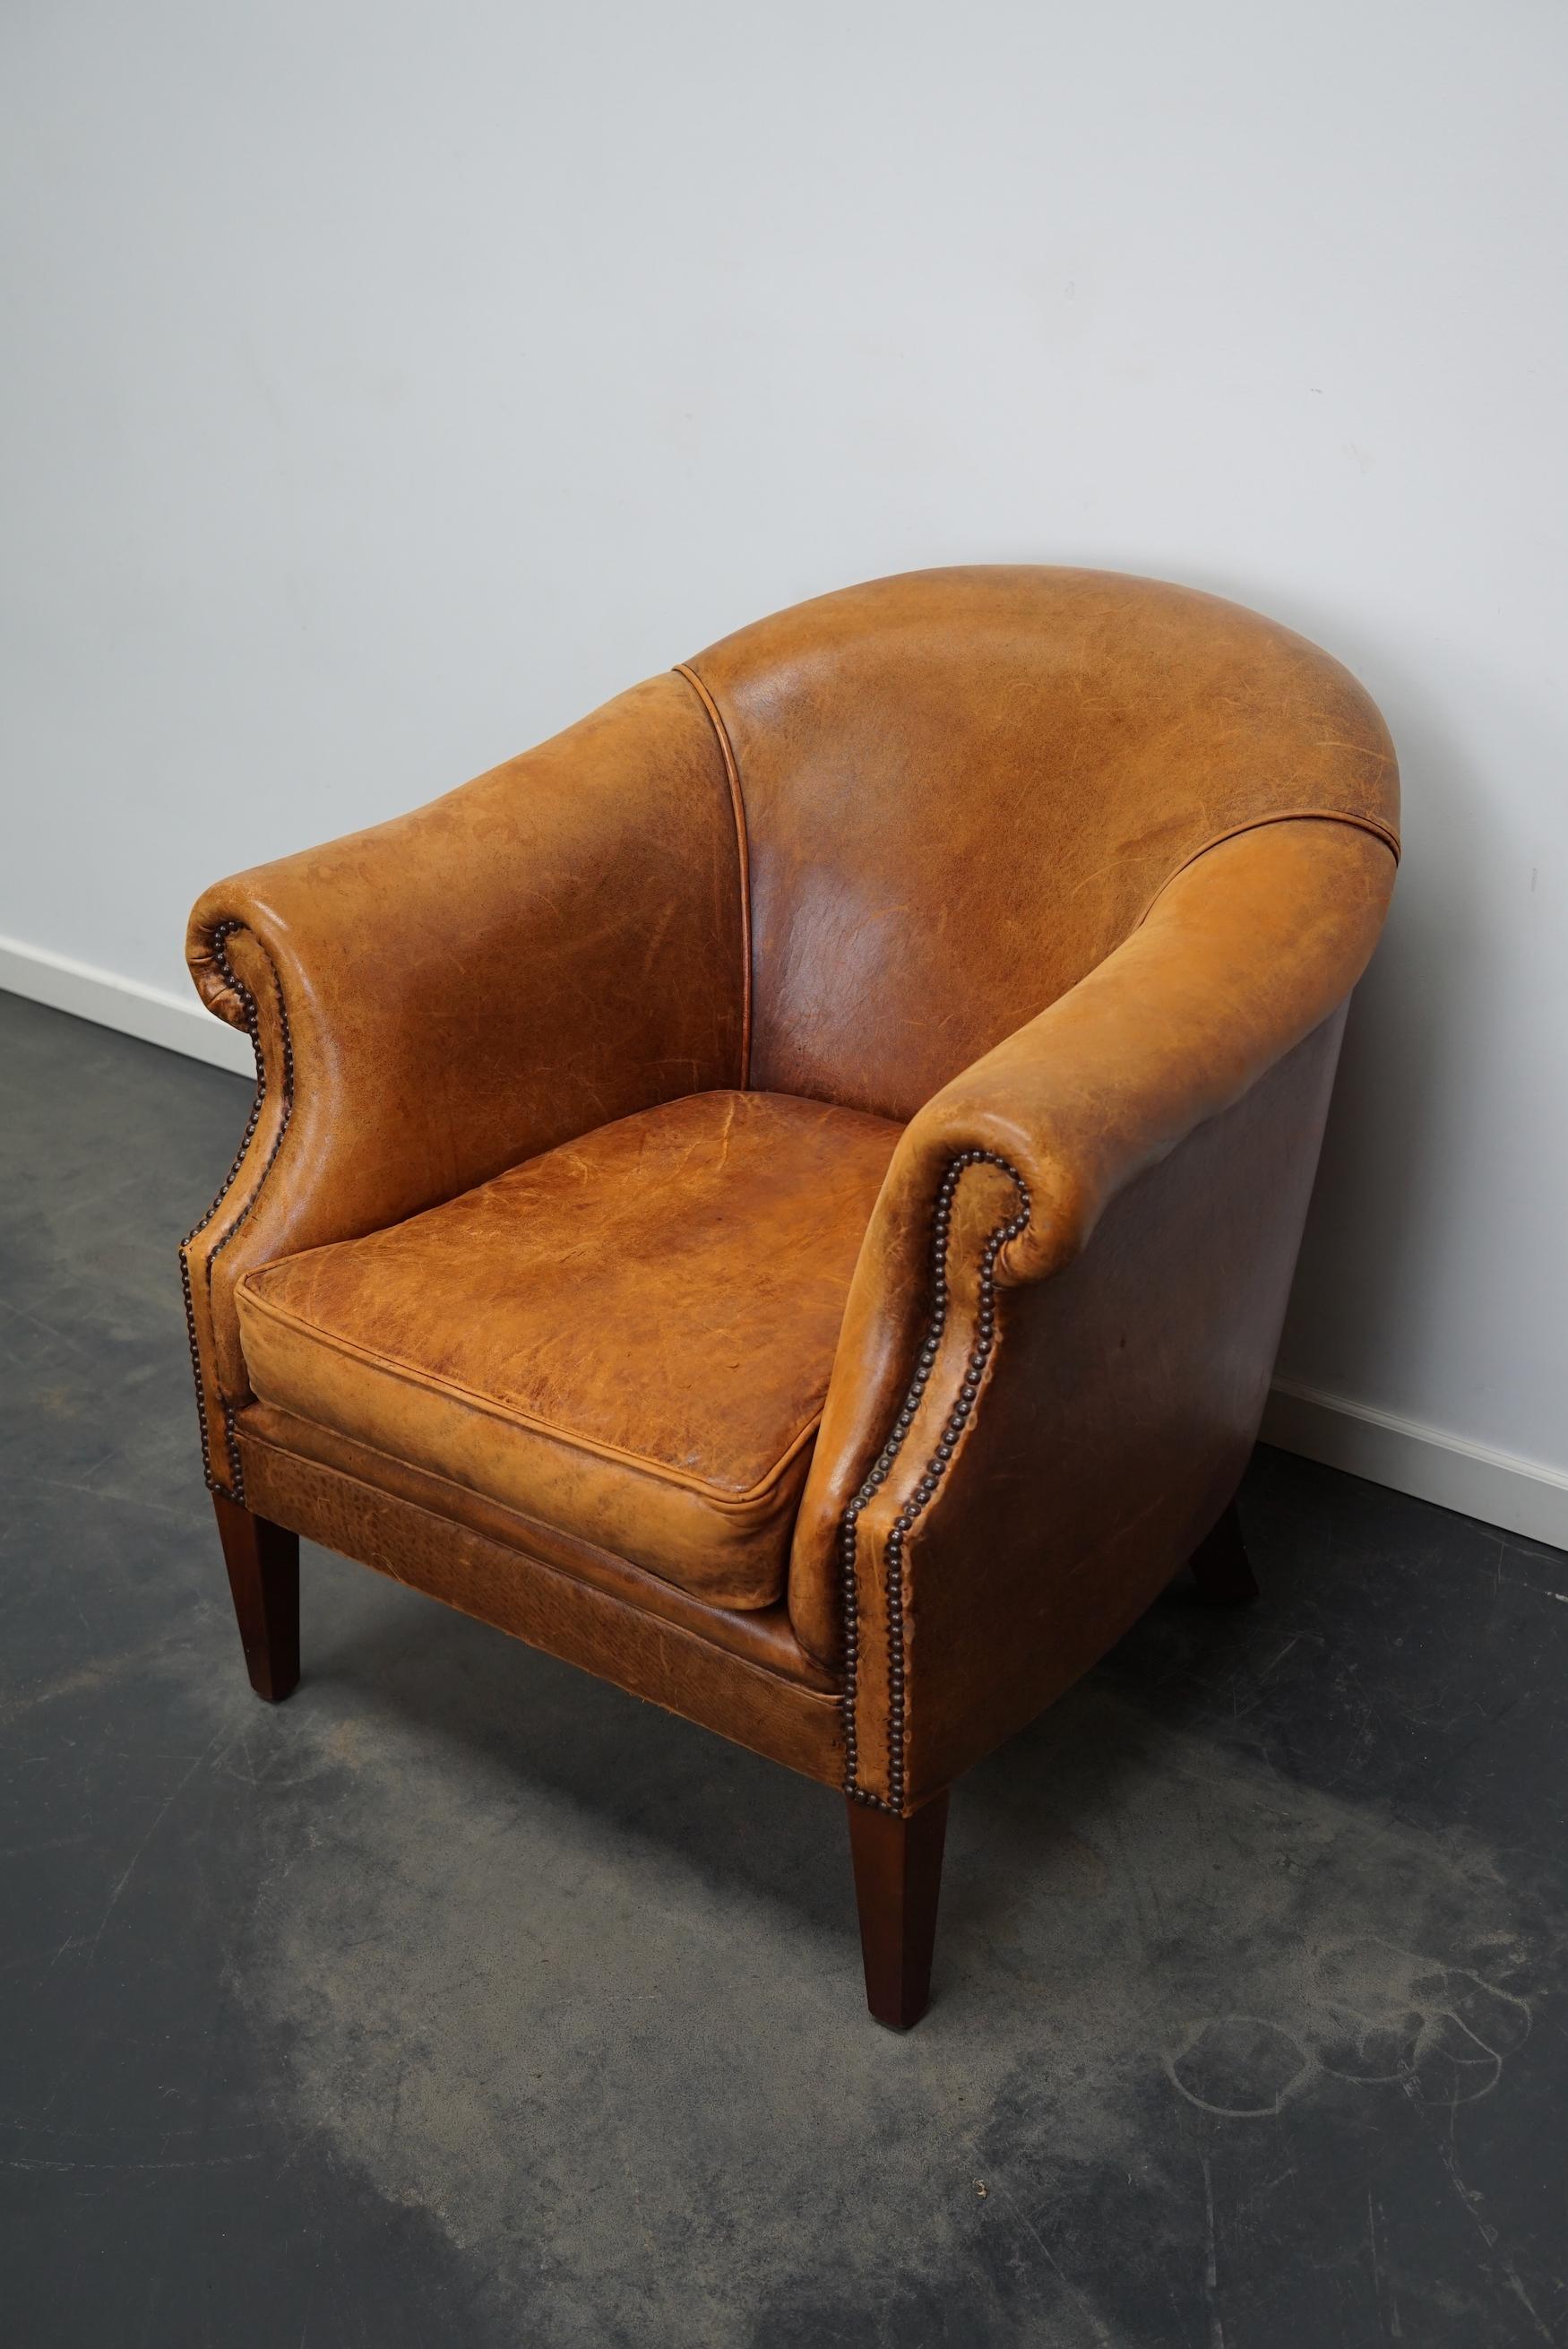 This cognac-colored leather club chair comes from the Netherlands. It is upholstered with cognac-colored leather and features metal rivets and wooden legs.